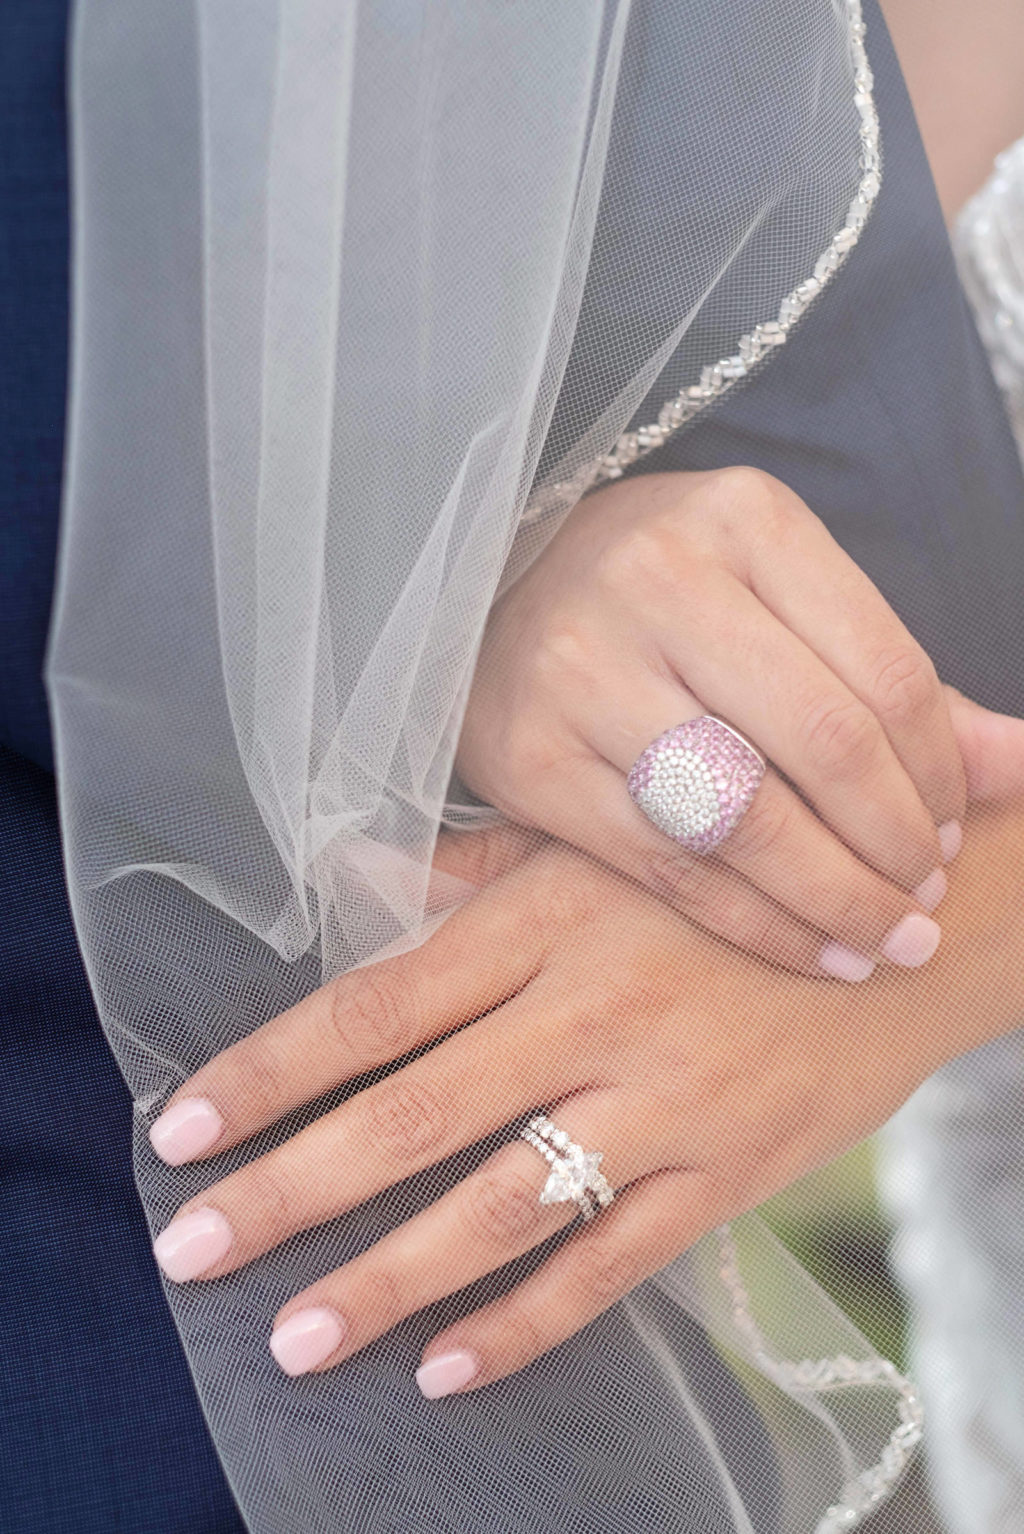 Bride with Veil and Wedding Ring | Engagement Ring Photo